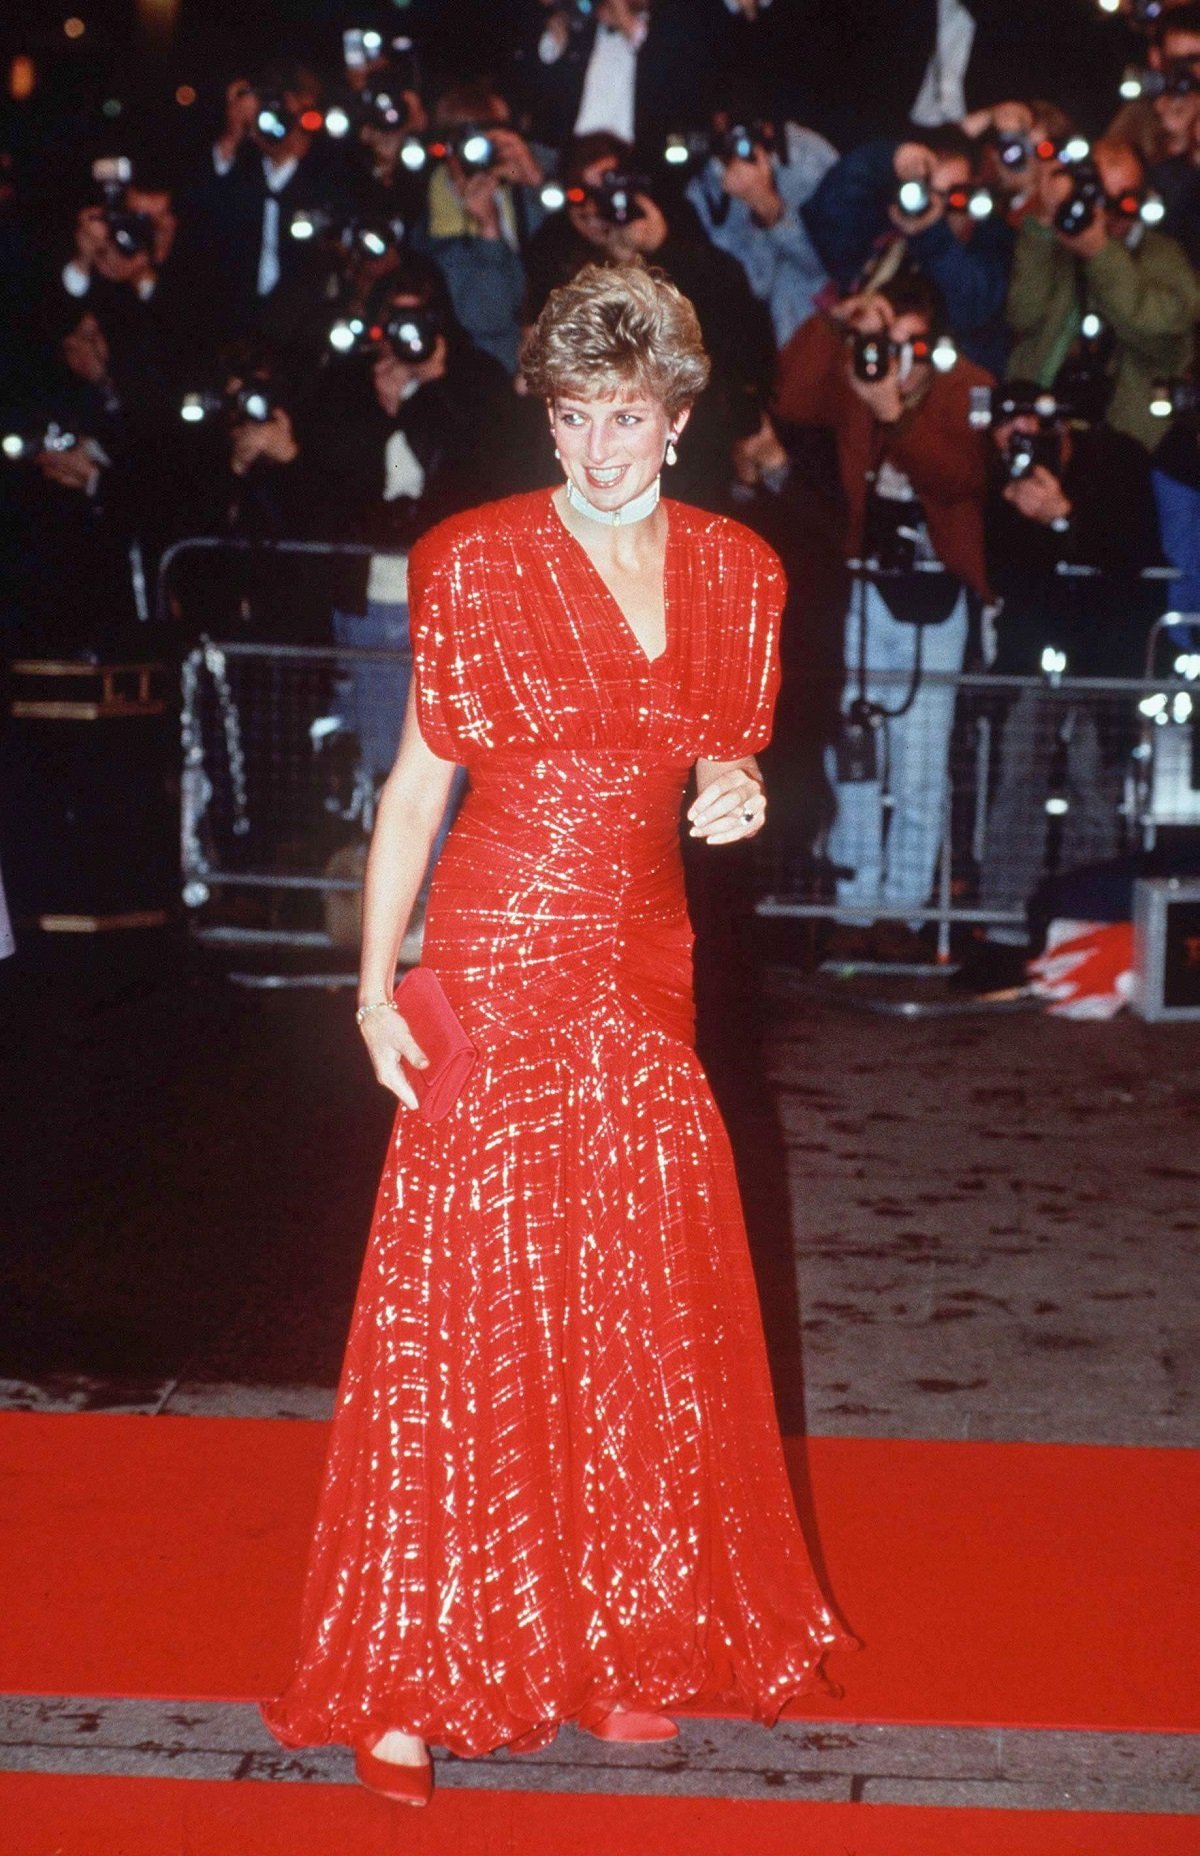 Princess Diana wearing a red dress by Bruce Oldfield at the premiere of 'Hot Shots' 